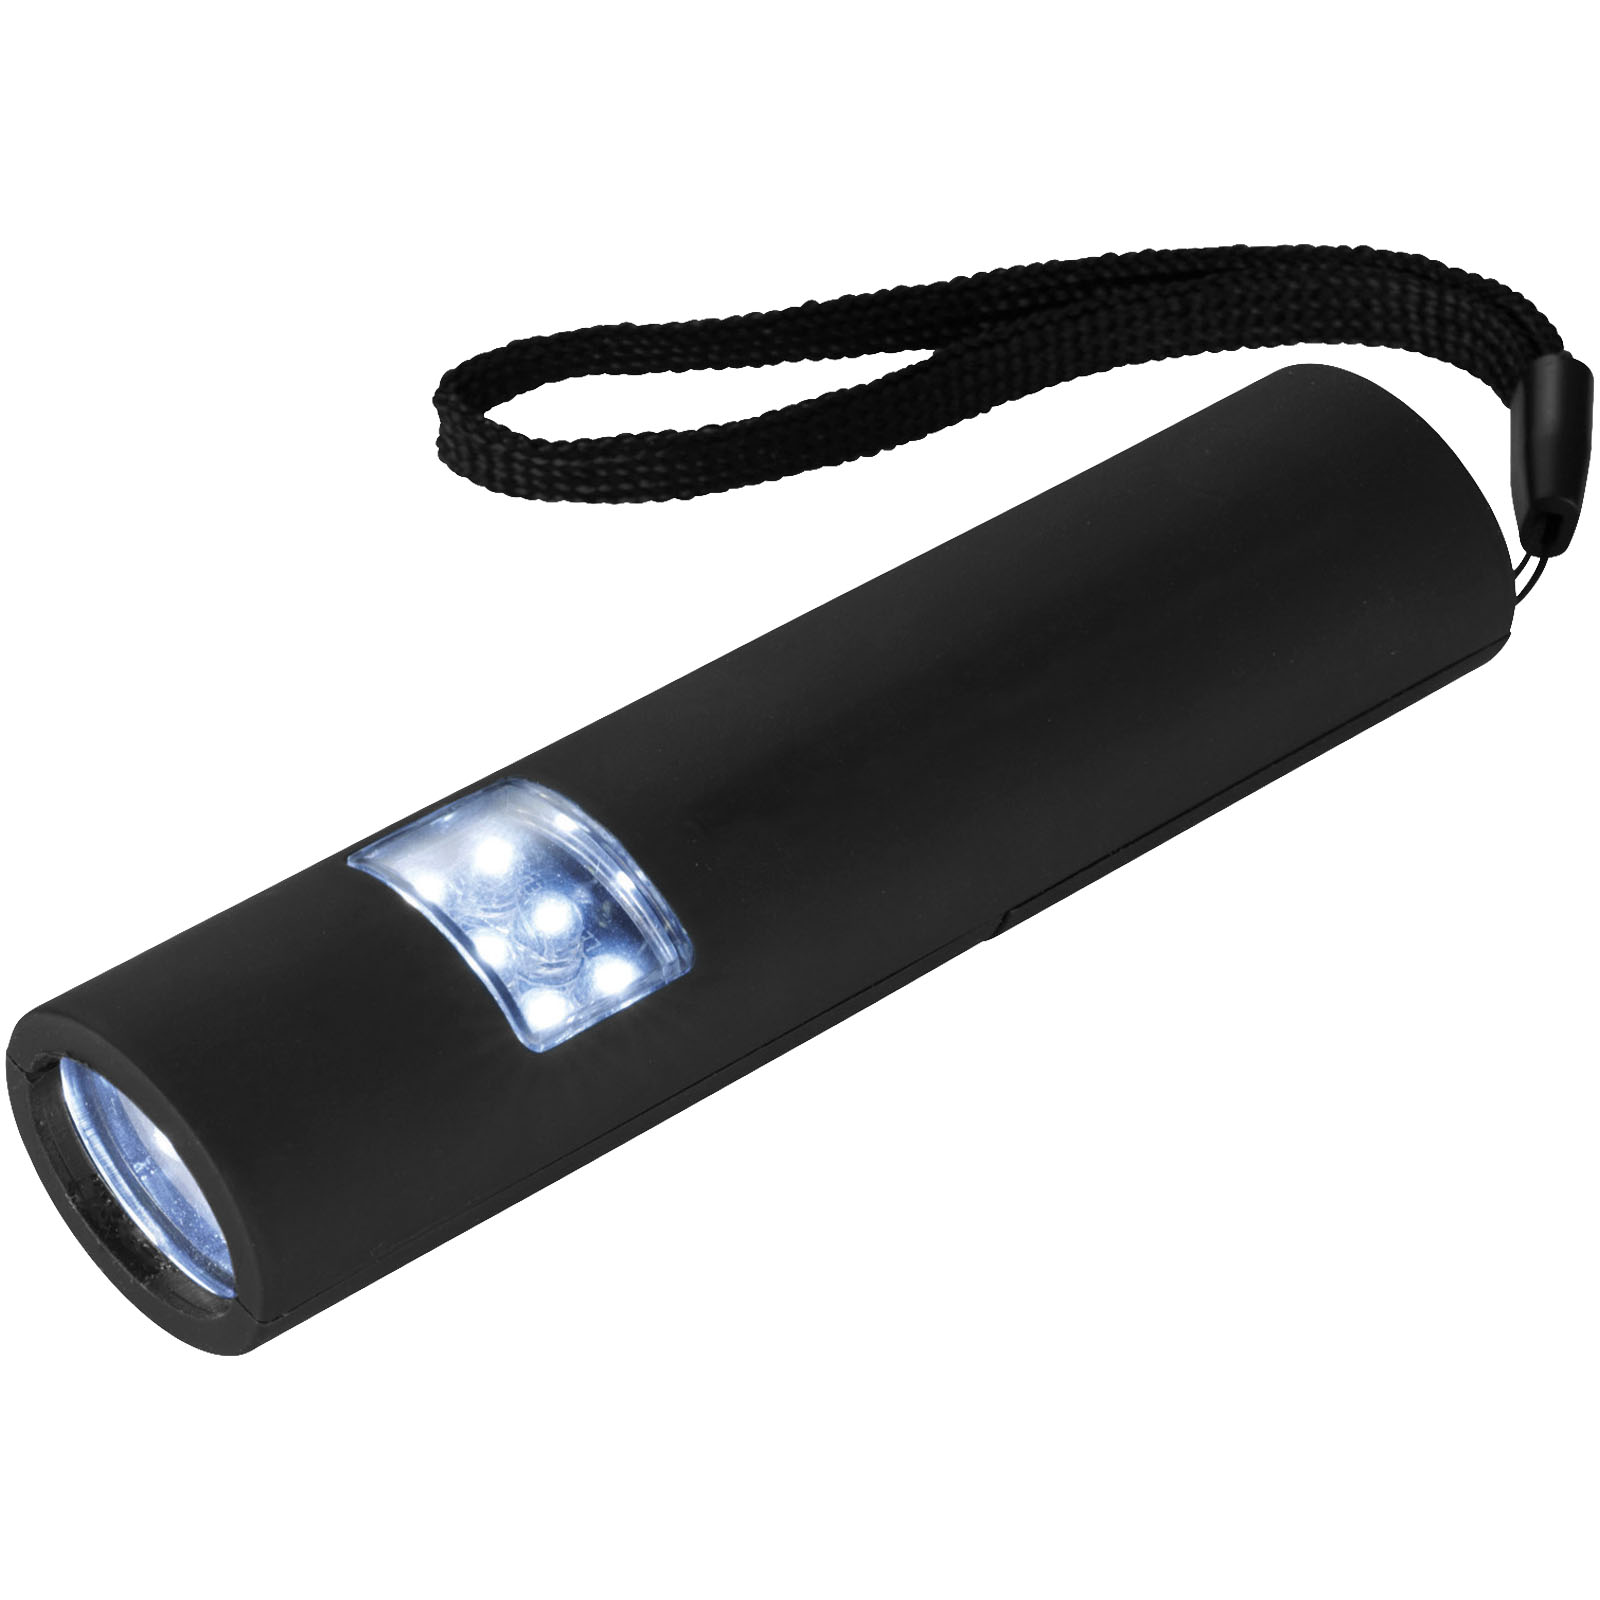 Advertising Lamps - Mini-grip LED magnetic torch light